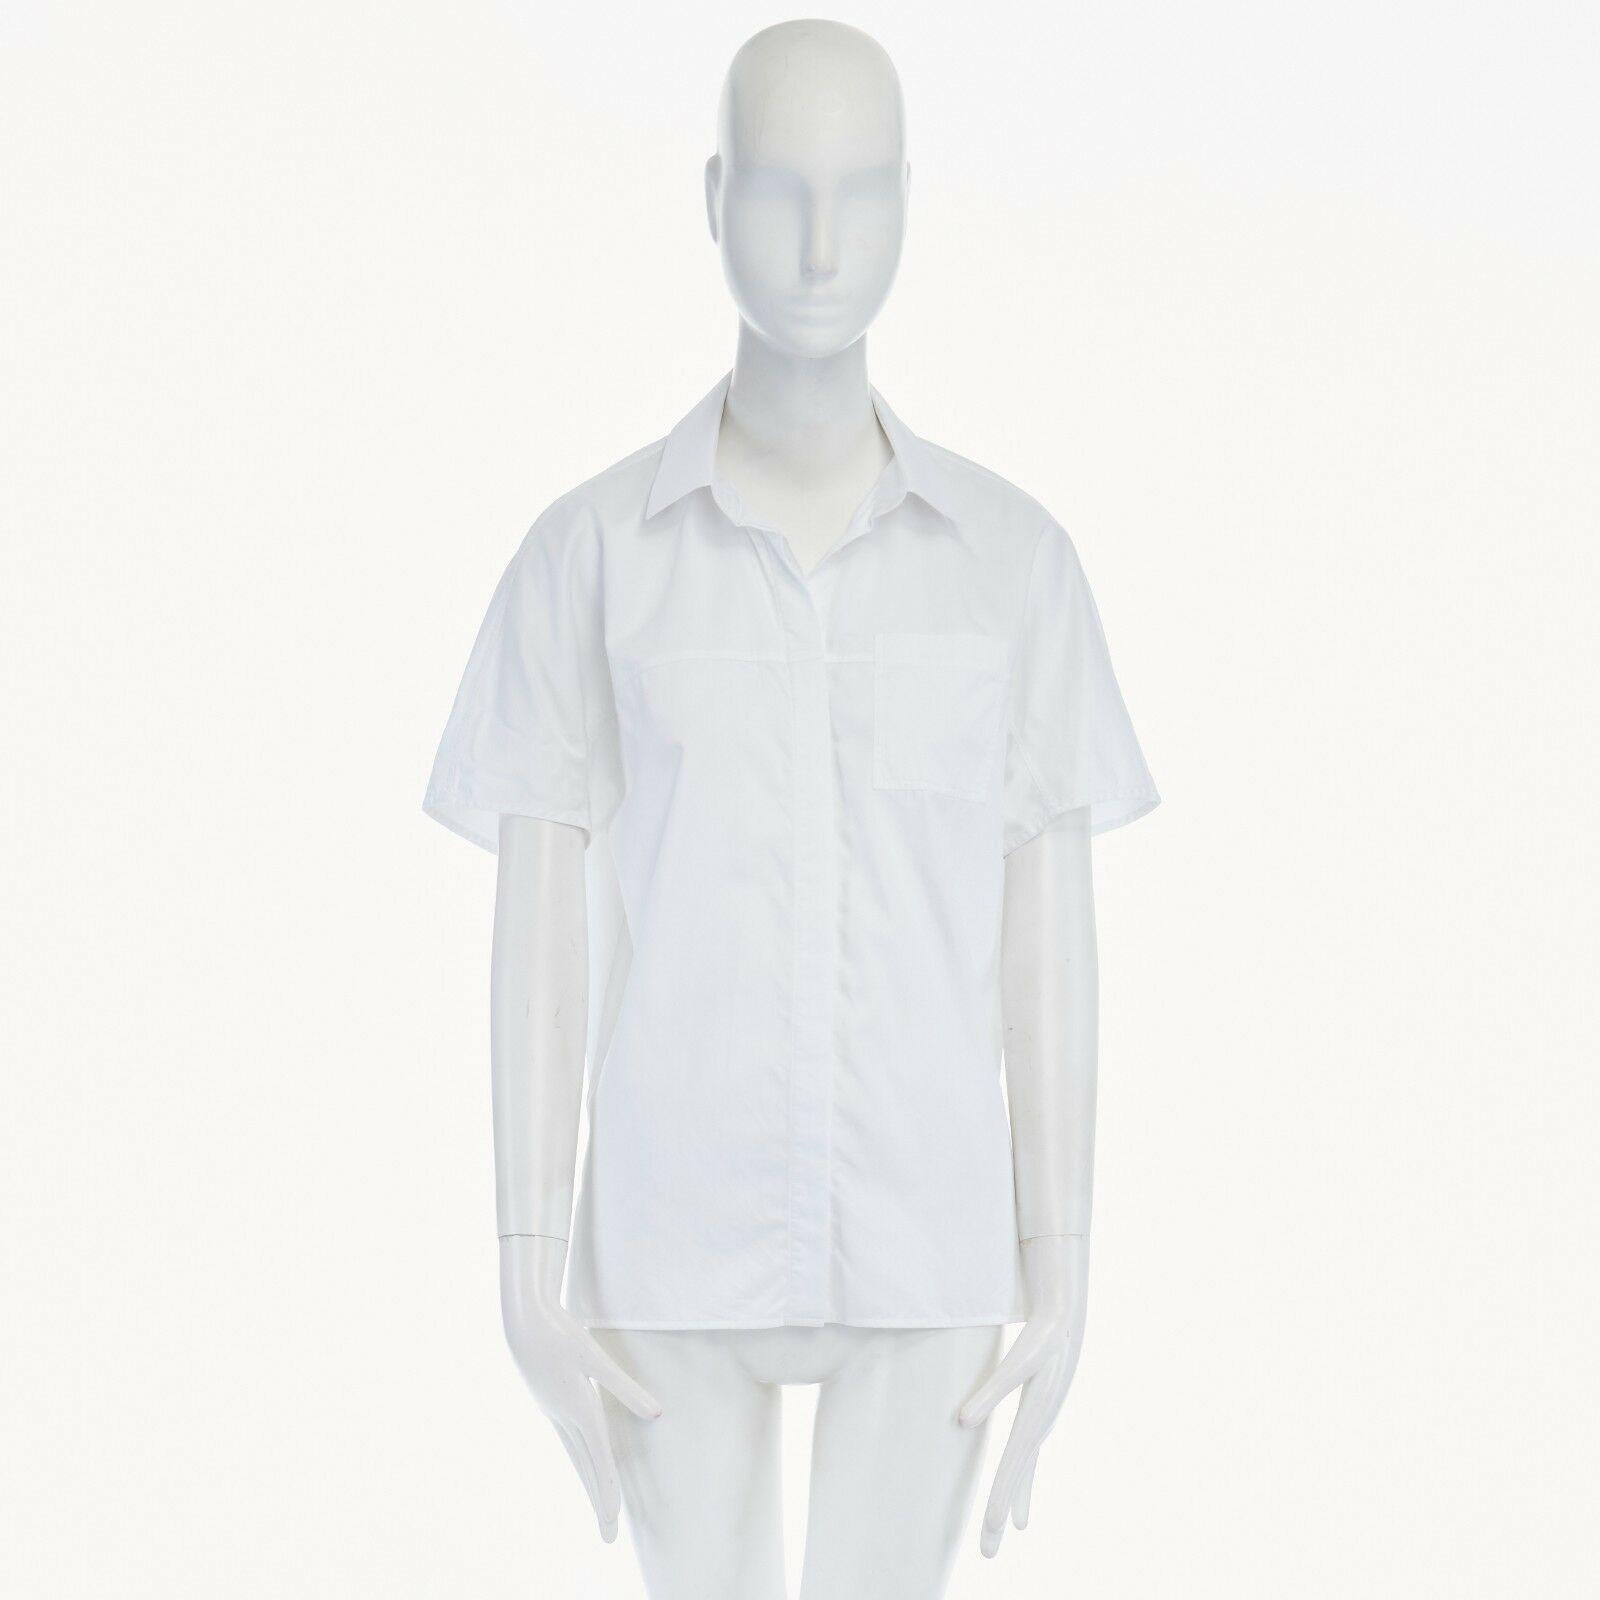 JASON WU white cotton rounded shoulder short sleeve single pocket shirt top US6 
Reference: LNKO/A00285 
Brand: Jason Wu 
Material: Cotton 
Color: White
Pattern: Solid 
Closure: Button 
Extra Detail: White cotton. Classic spread collar. Concealed